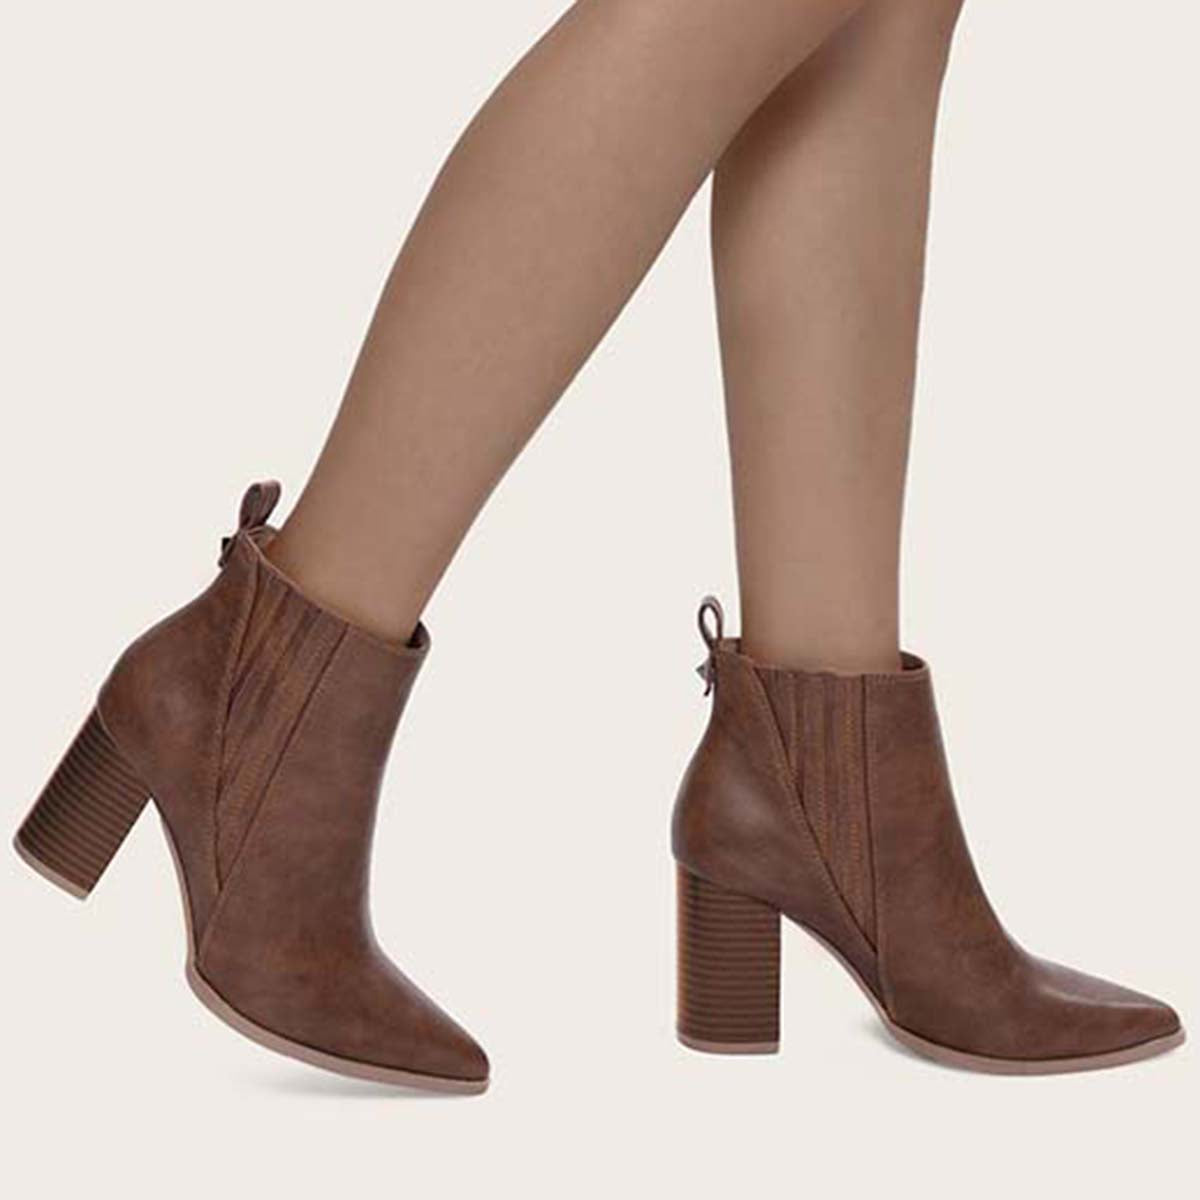 Veooy Women Chunky High Heel Ankle Boots Slip On Dress Booties